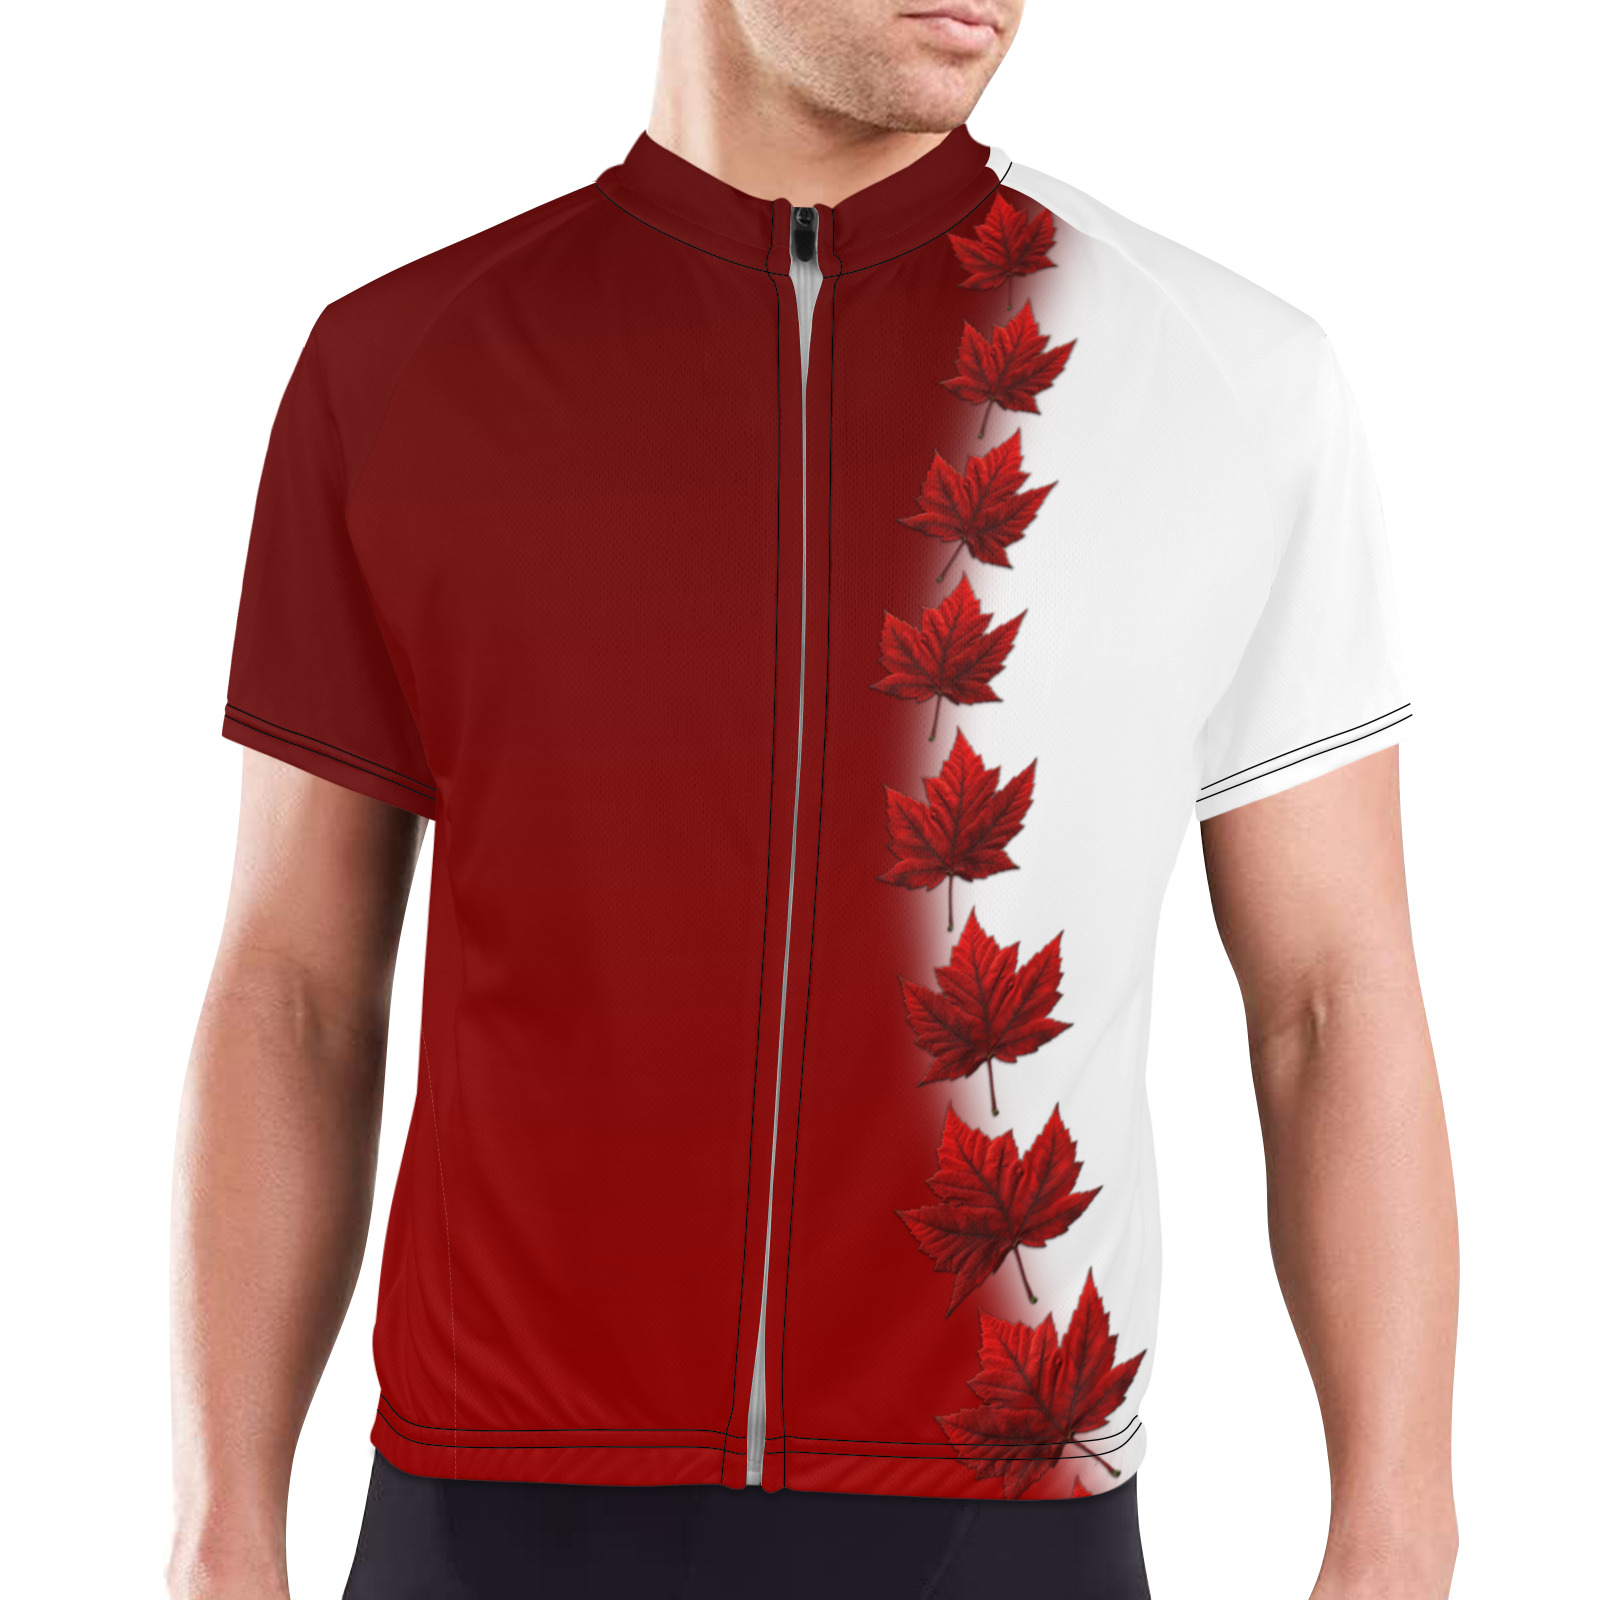 Canada Maple Leaf Cycling Shirts Men's Cycling Jersey (Model T77)